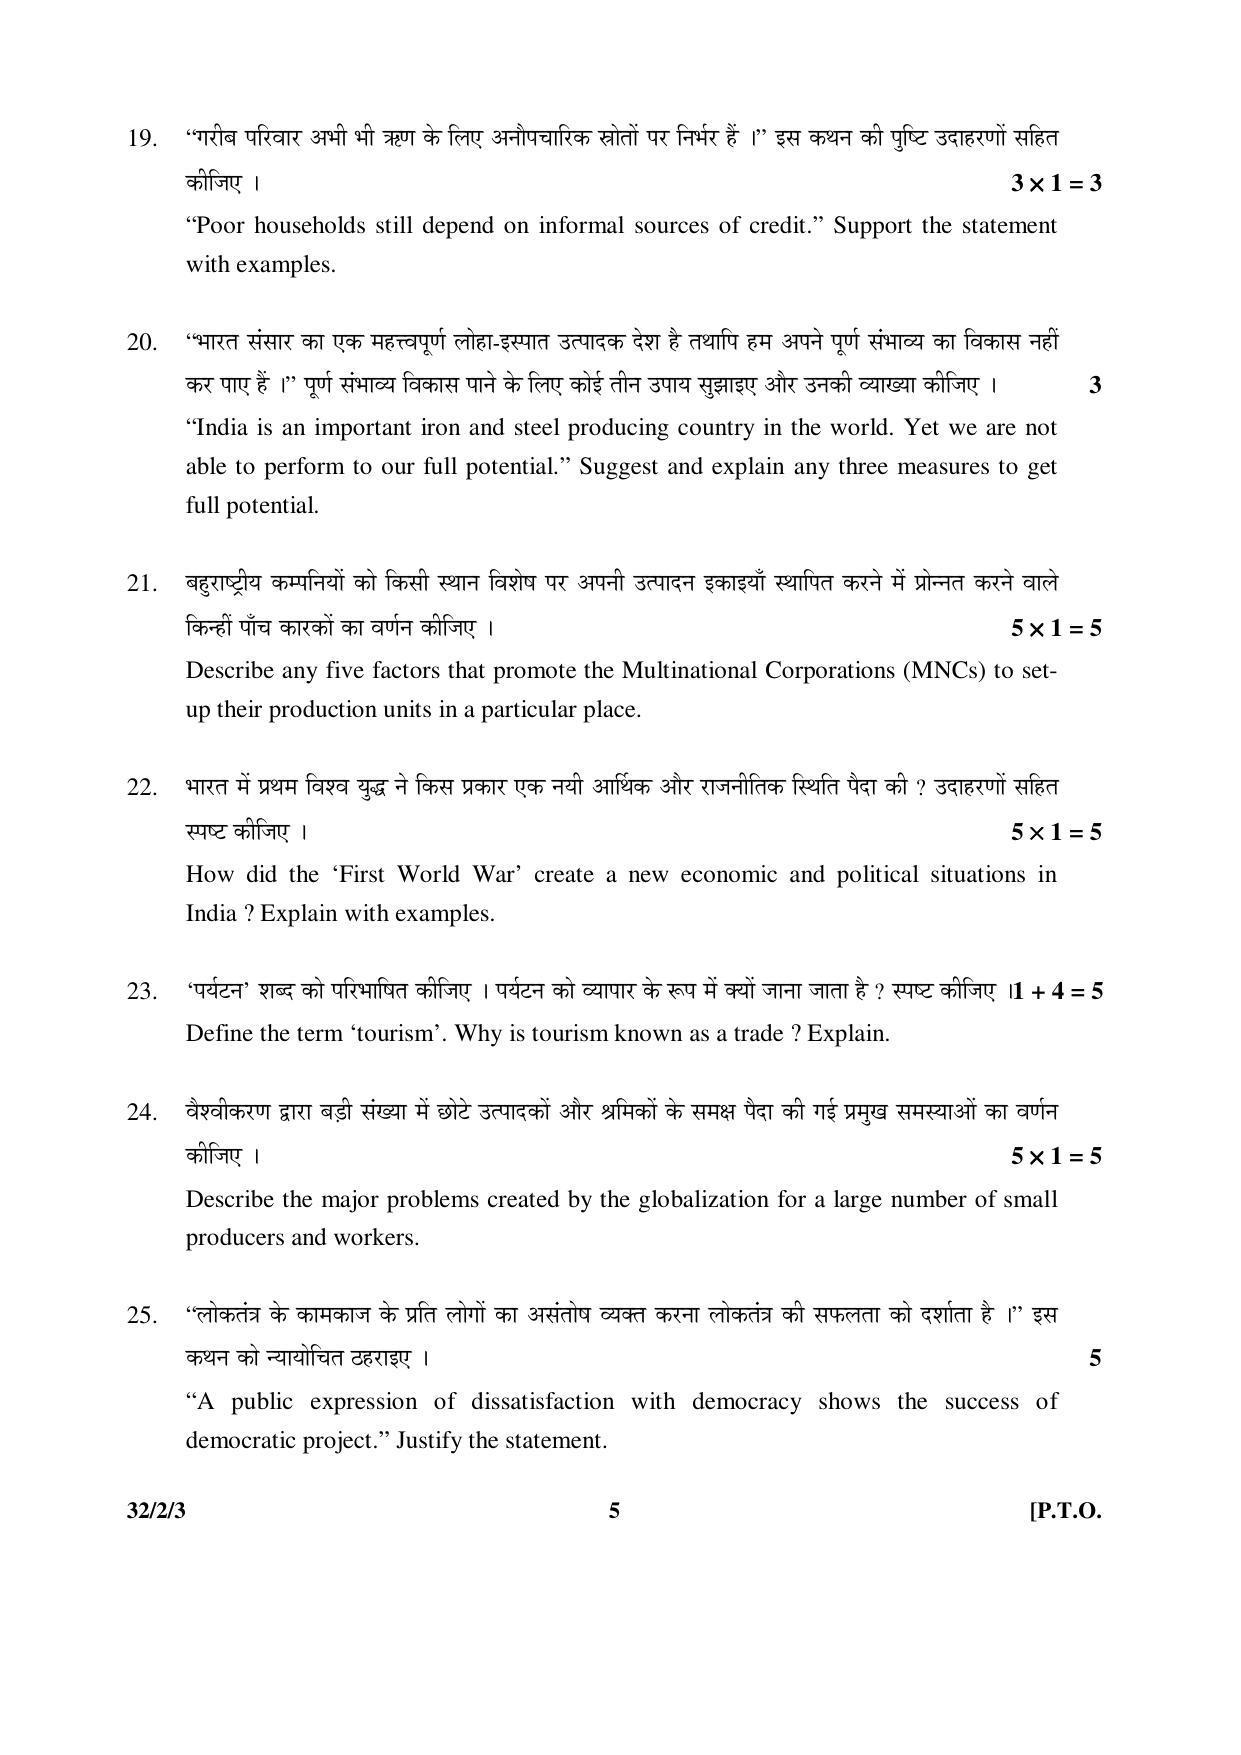 CBSE Class 10 32-2-3 _Social Science 2016 Question Paper - Page 5